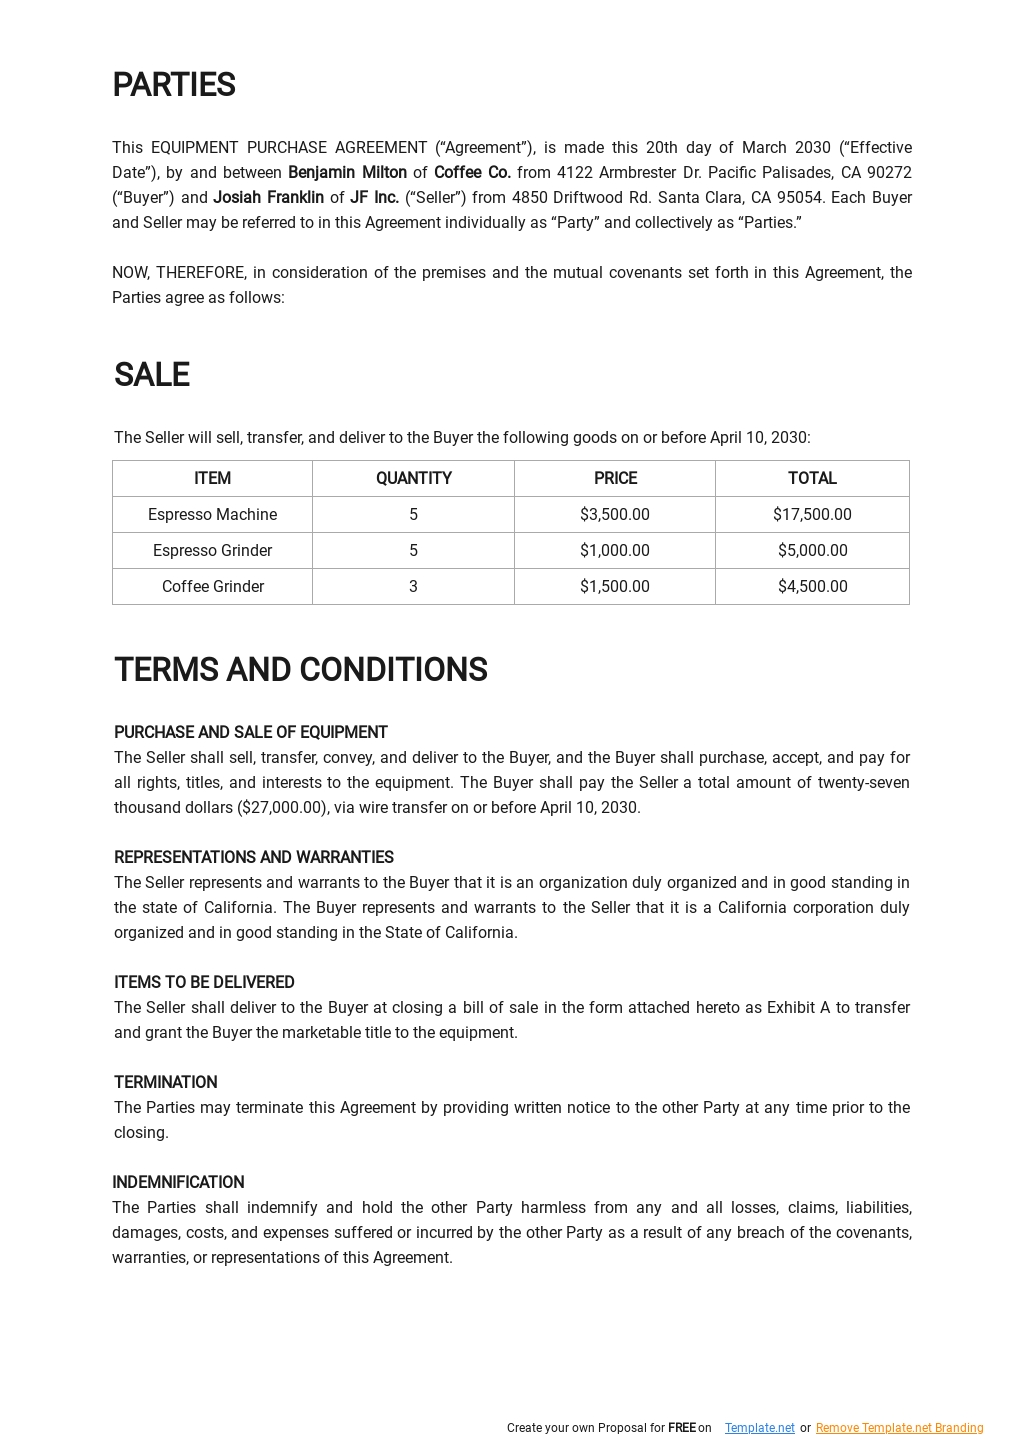 Simple Equipment Purchase Agreement Template 1.jpe